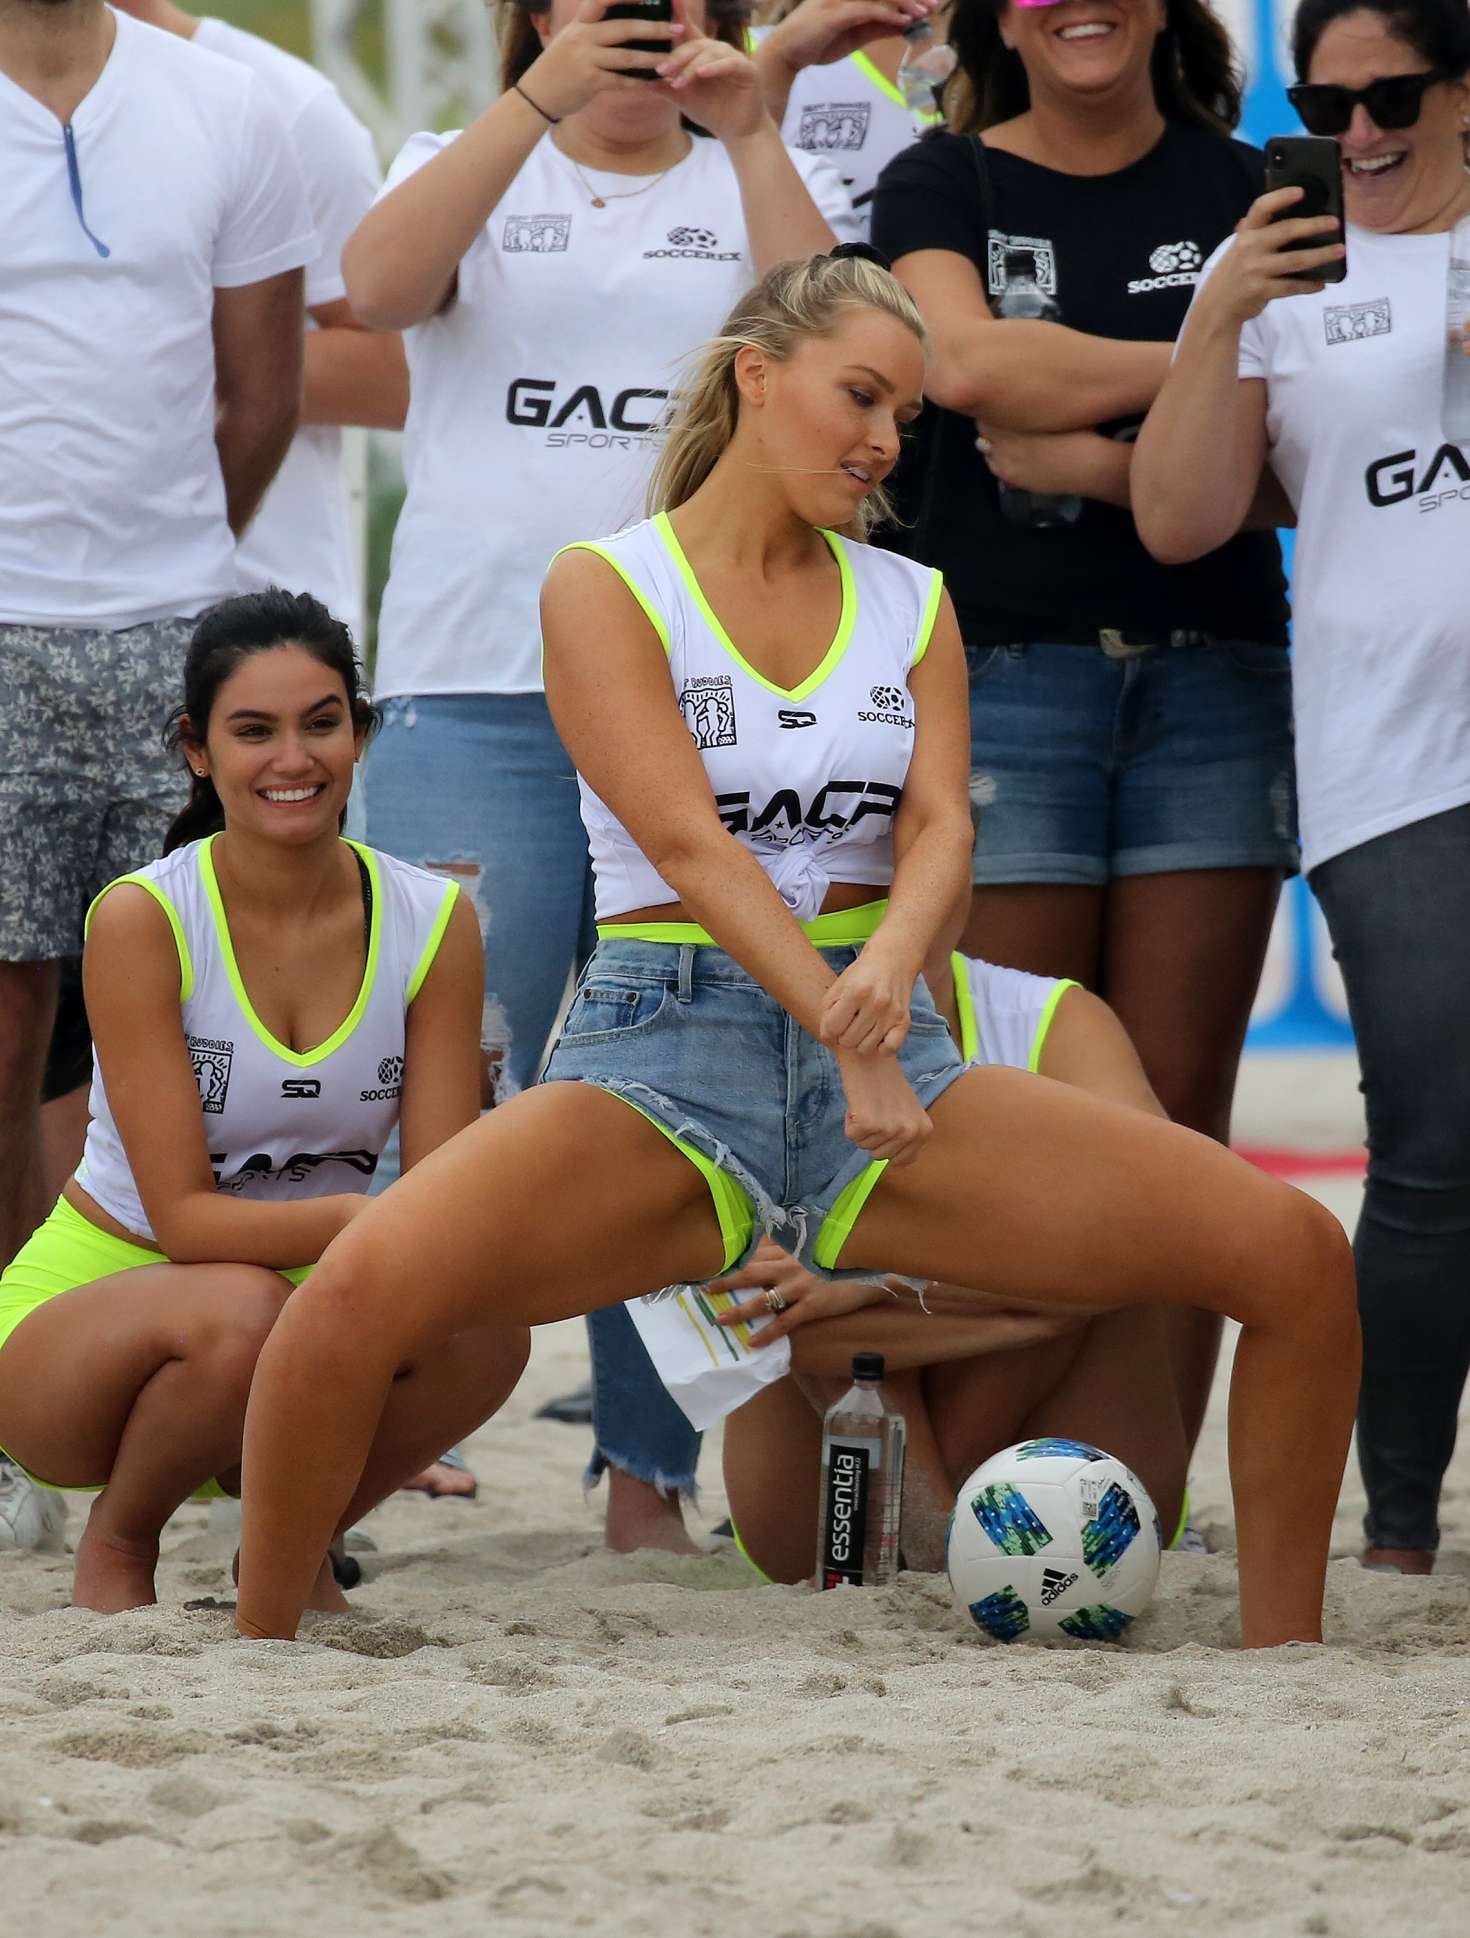 Camille Kostek â€“ Sports Illustrated Swimsuit Celebrity Beach Soccer Match in Miami